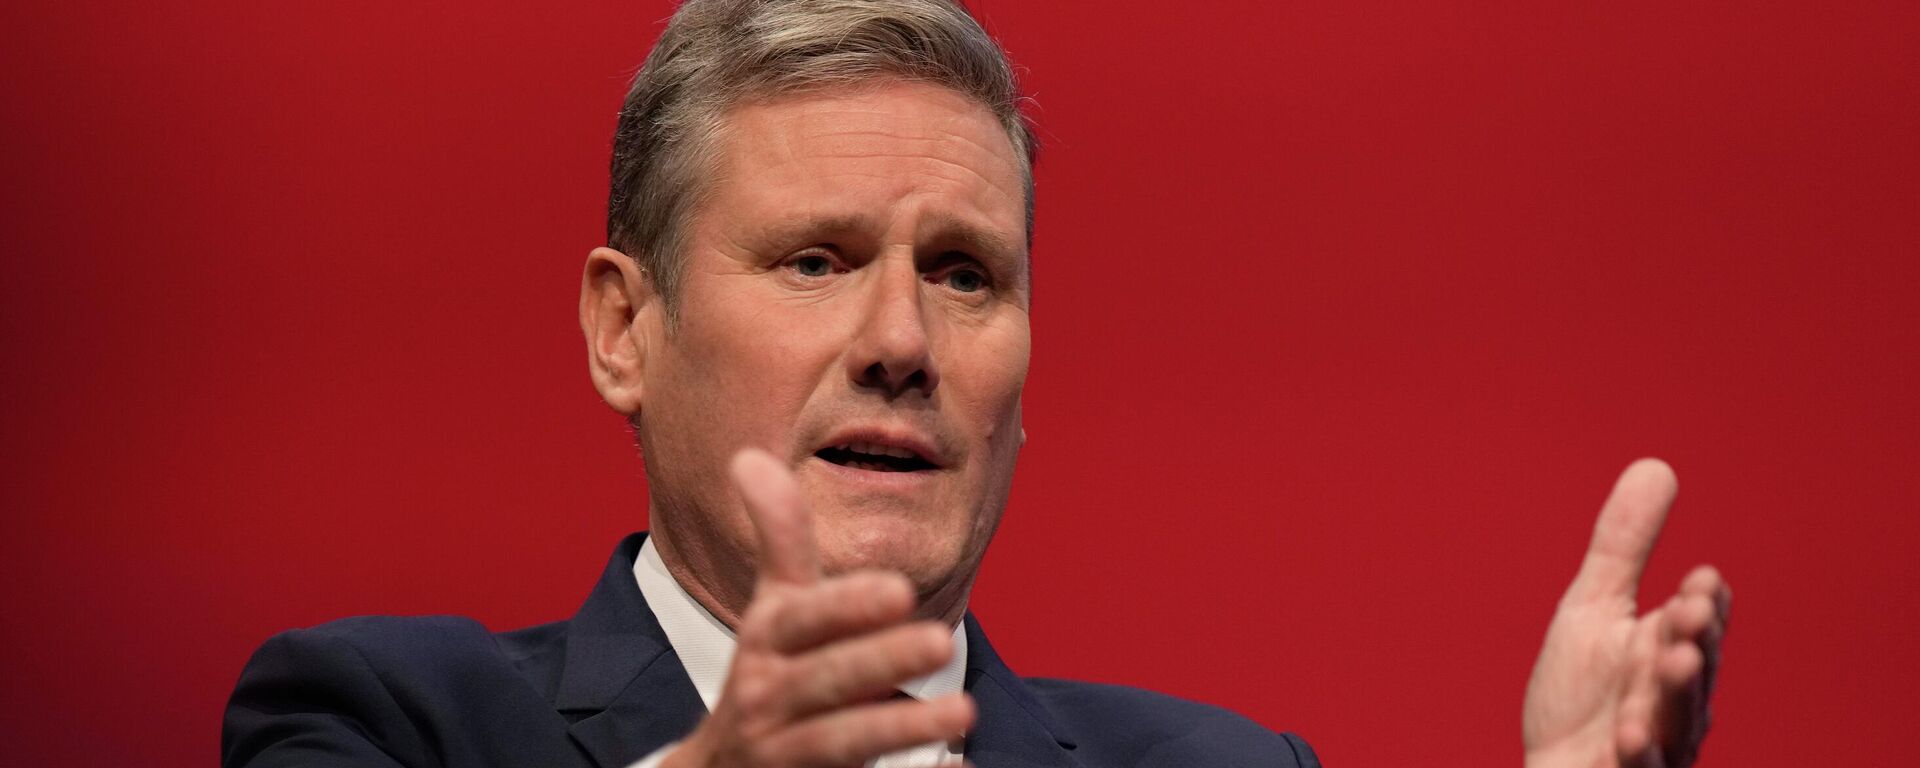 Leader of the British Labour Party Keir Starmer gestures as he makes his keynote speech at the annual party conference in Brighton, England, Sept. 29, 2021 - Sputnik International, 1920, 22.06.2022